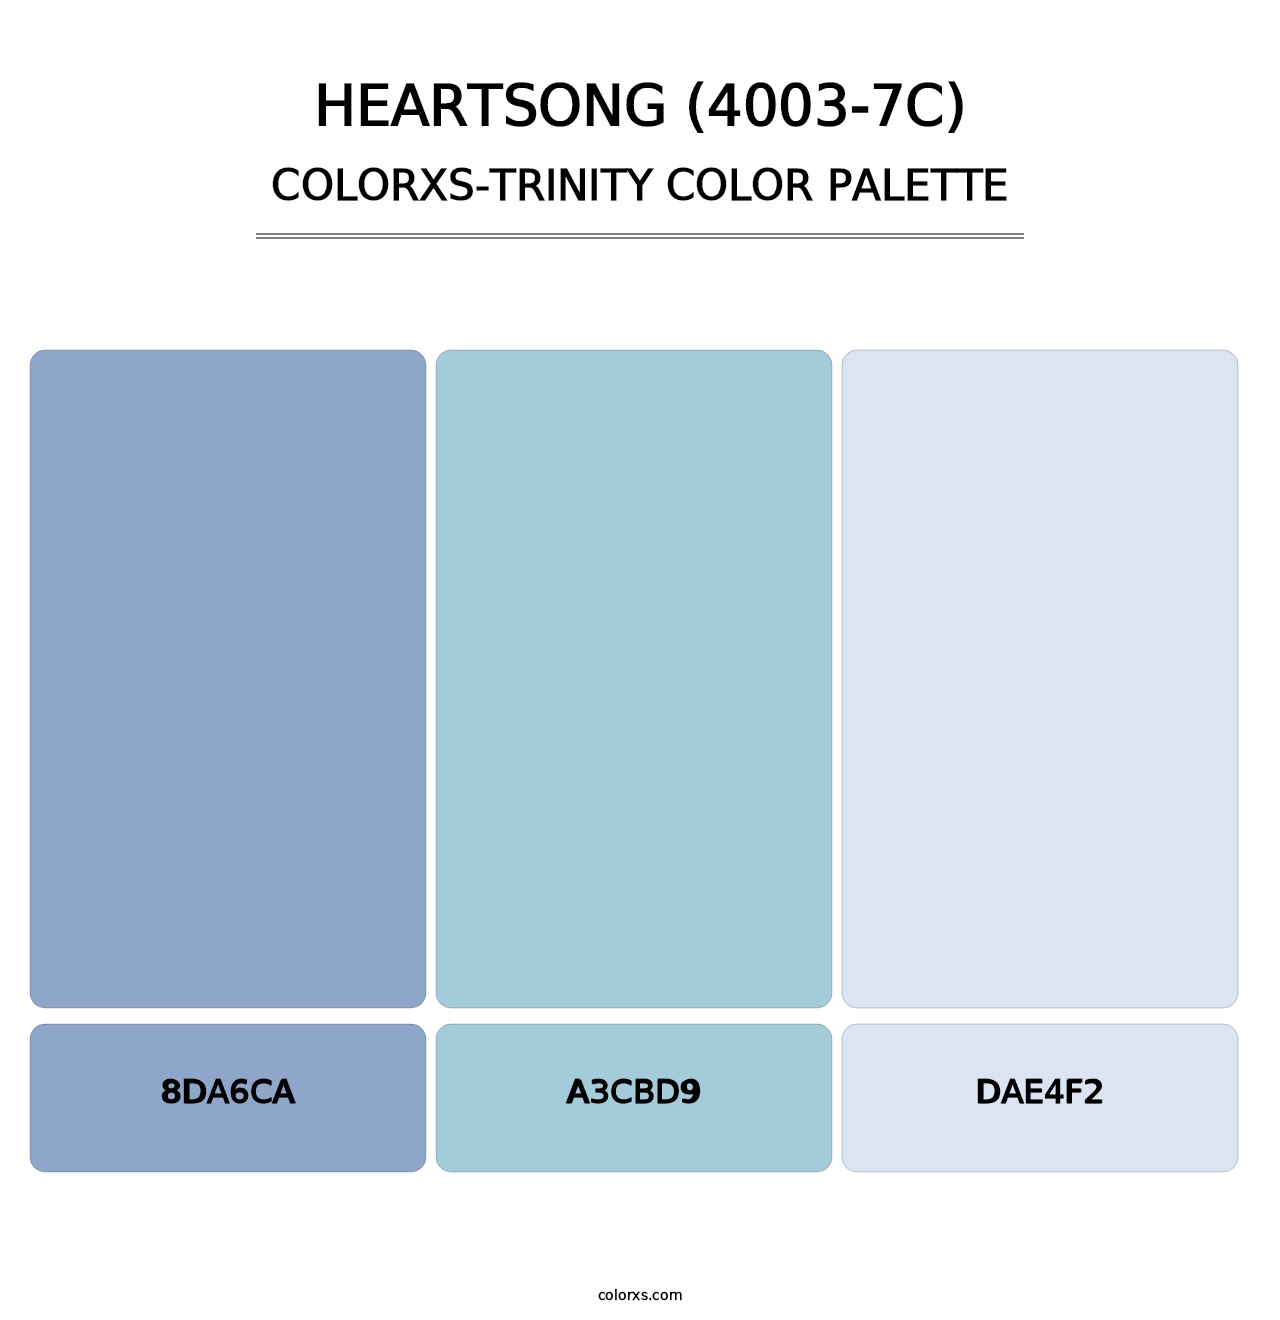 Heartsong (4003-7C) - Colorxs Trinity Palette